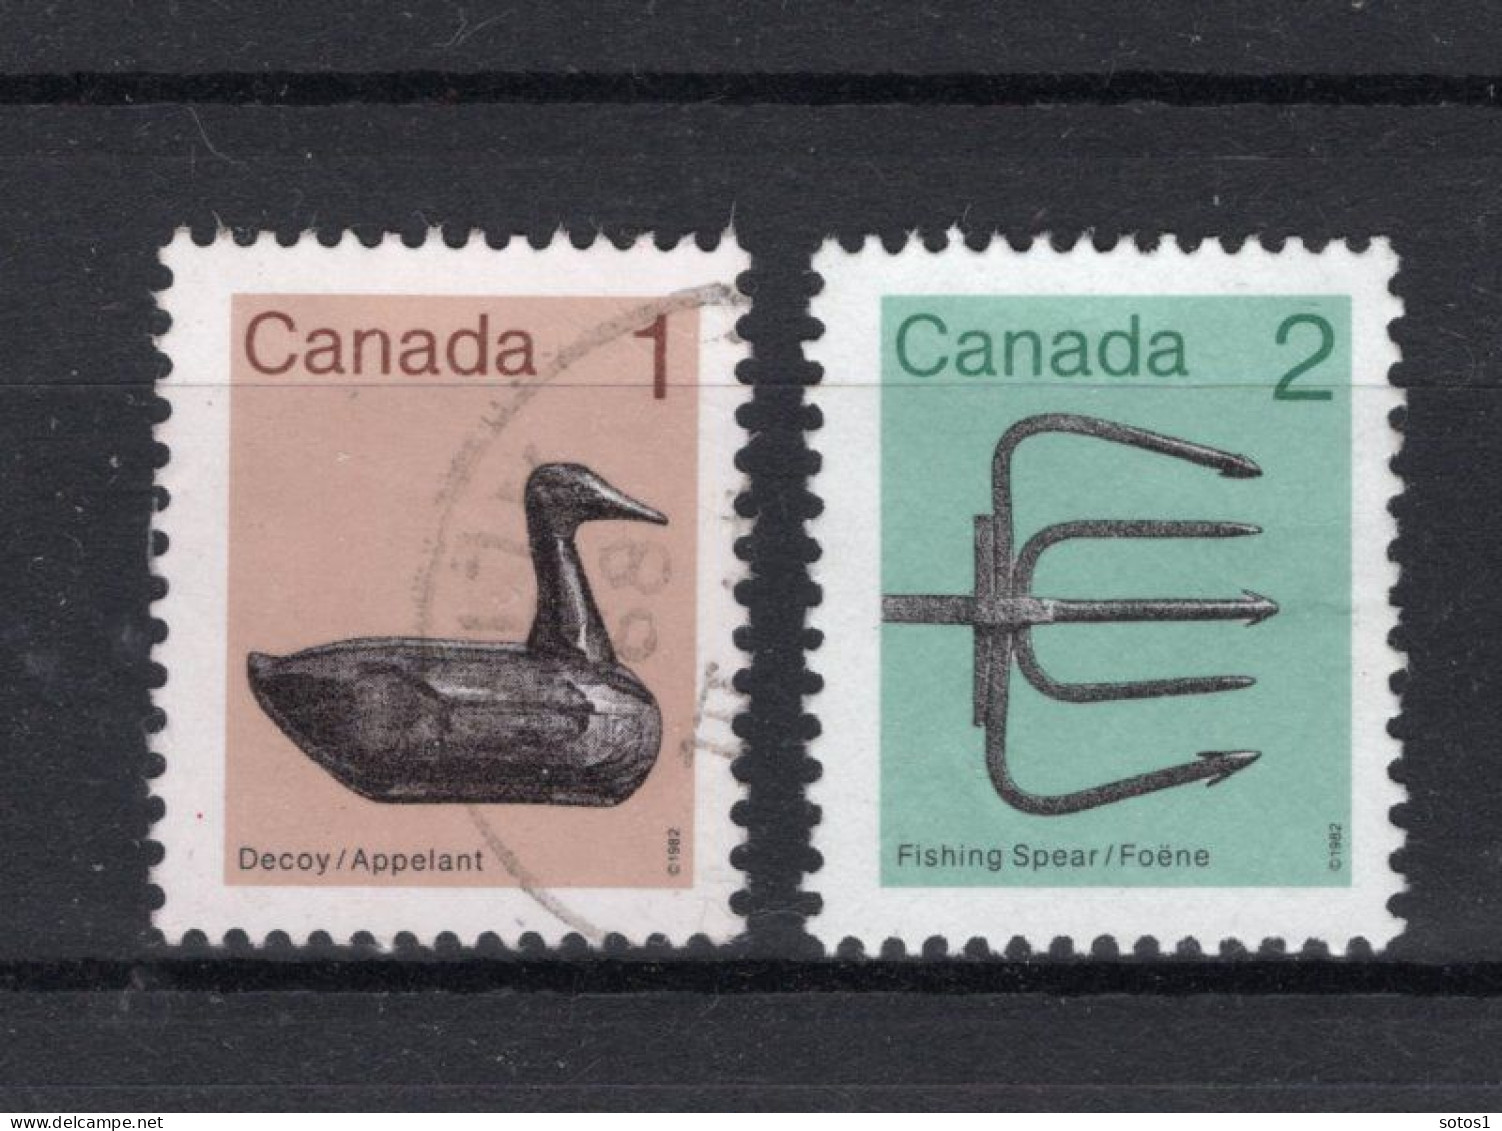 CANADA Yt. 818/819° Gestempeld 1982 - Used Stamps